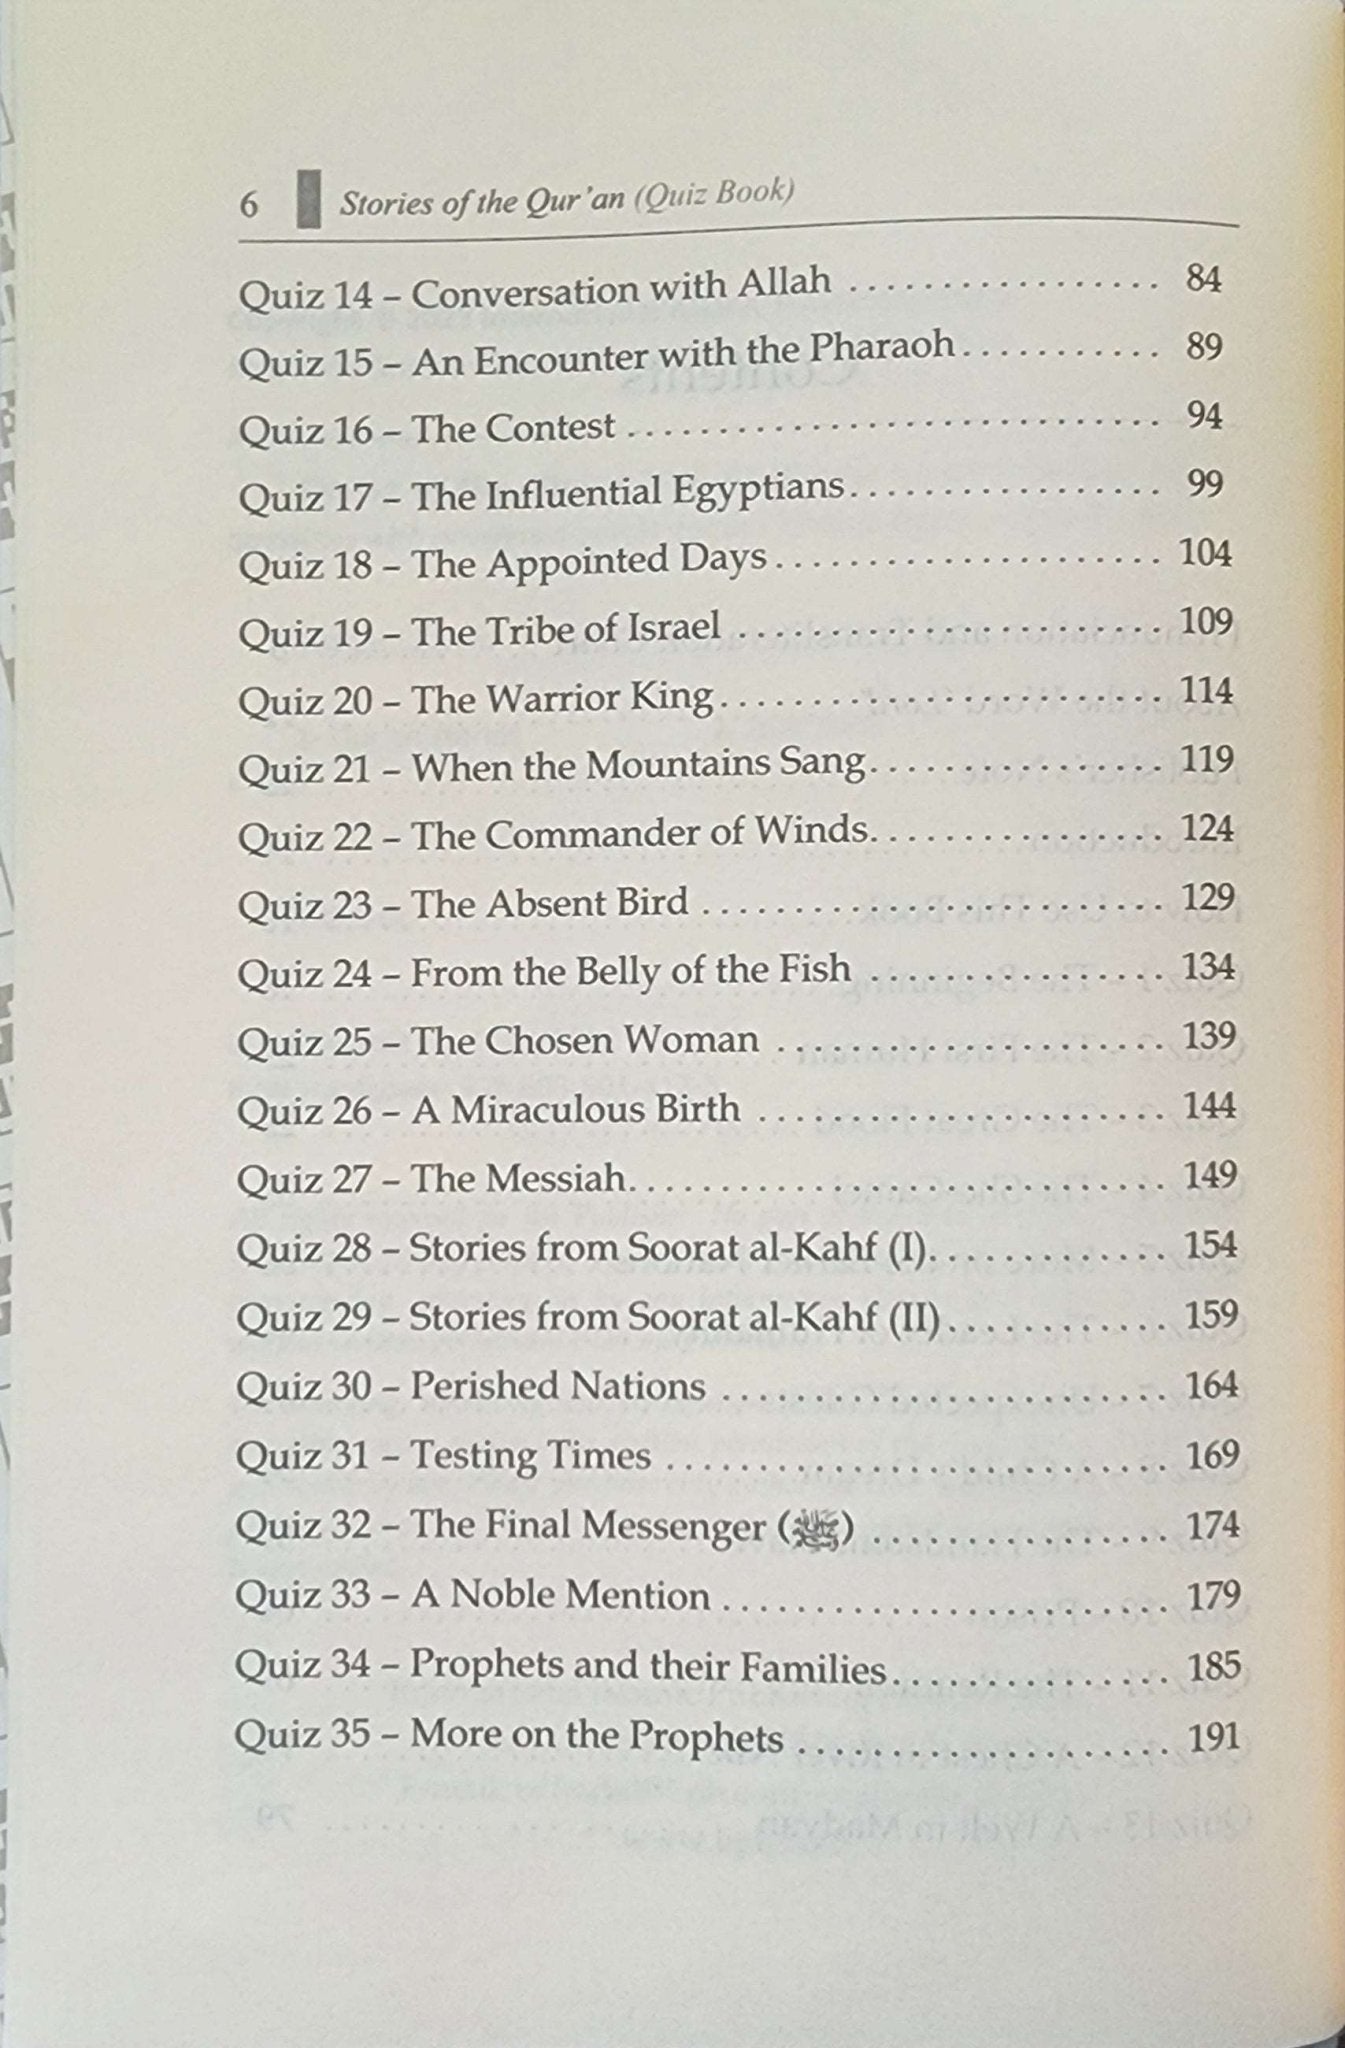 Stories of the Qur'an Quiz Book | 400 Multiple Choice Questions With Answers and References - The Islamic Book Cafe LLC